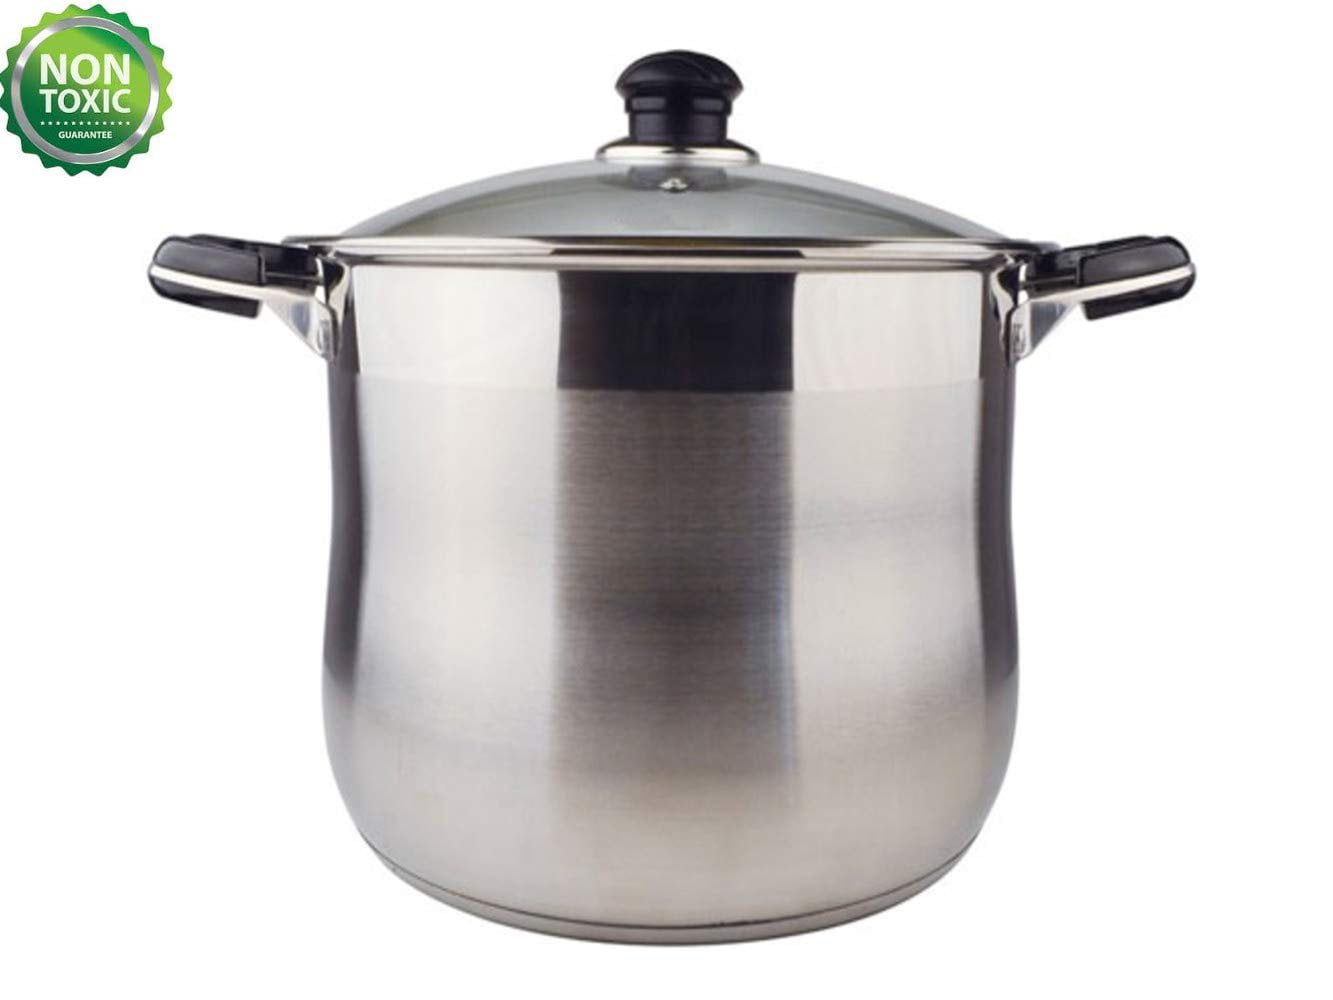 Great Gatherings 16-Quart Stainless Steel Stock Pot